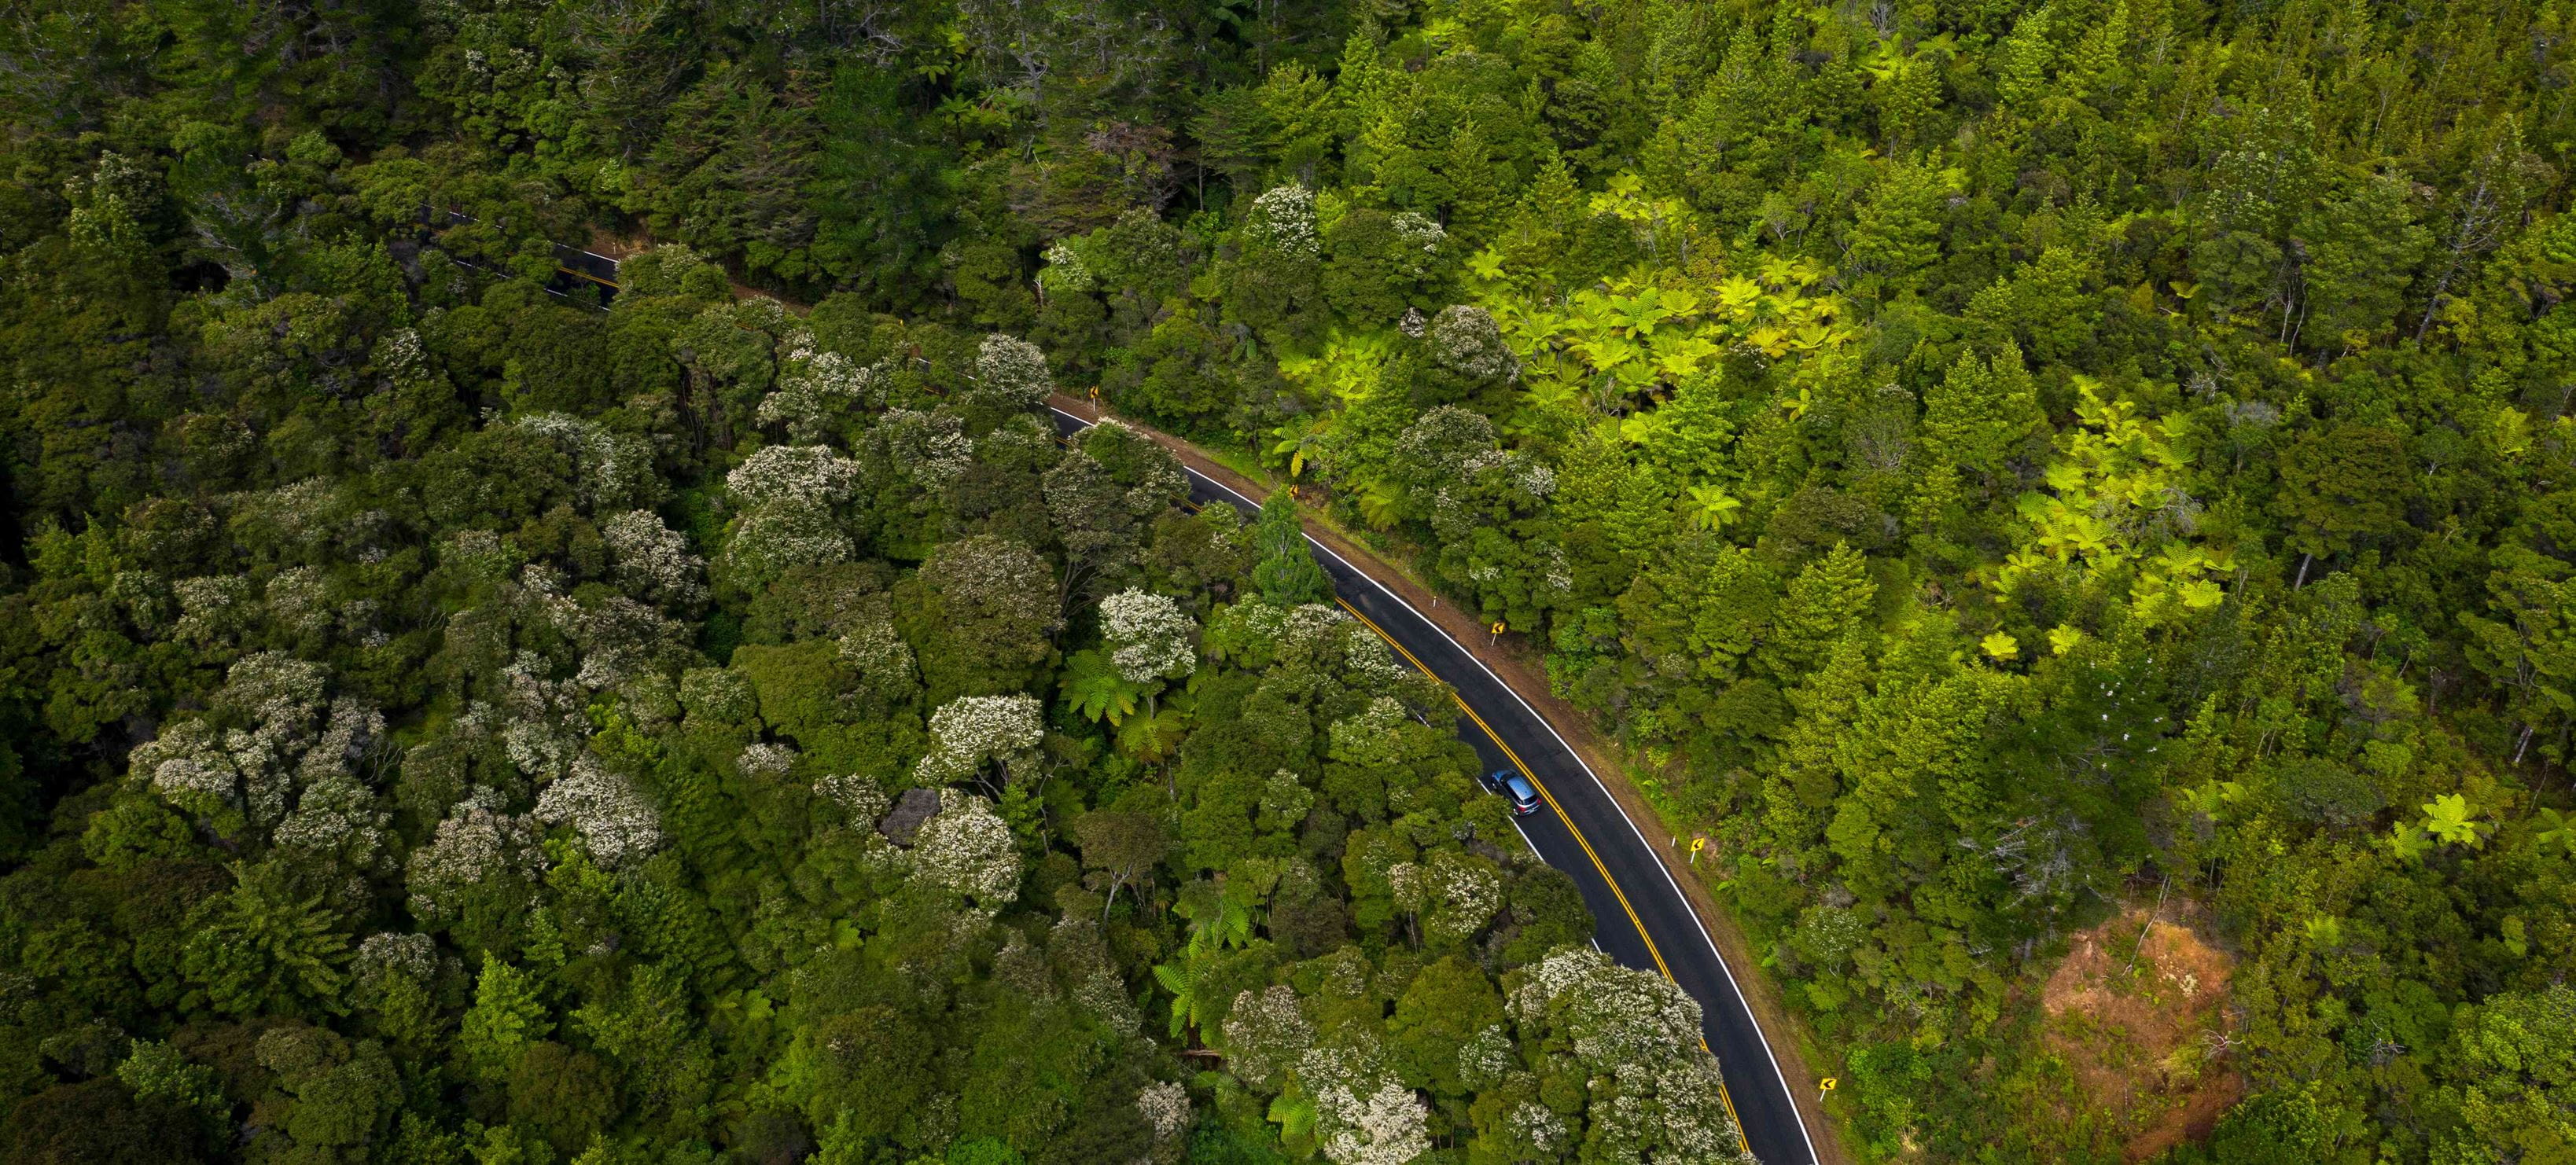 Aerial shot of a curvy road passing through a forest